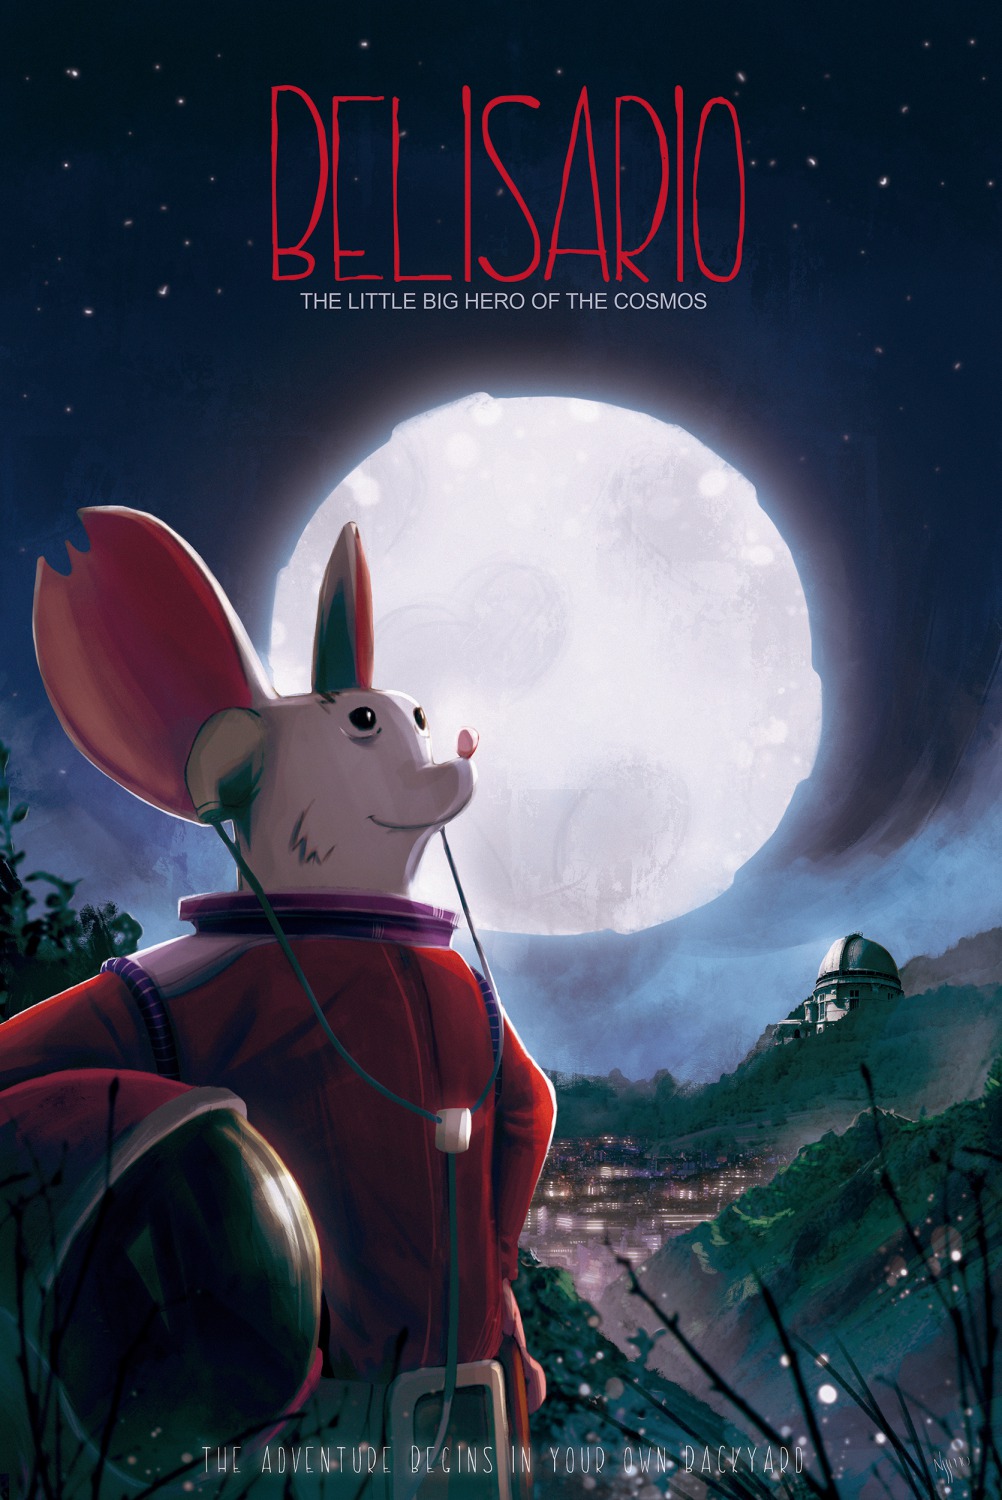 Extra Large Movie Poster Image for Belisario - The Little Big Hero of the Cosmos 